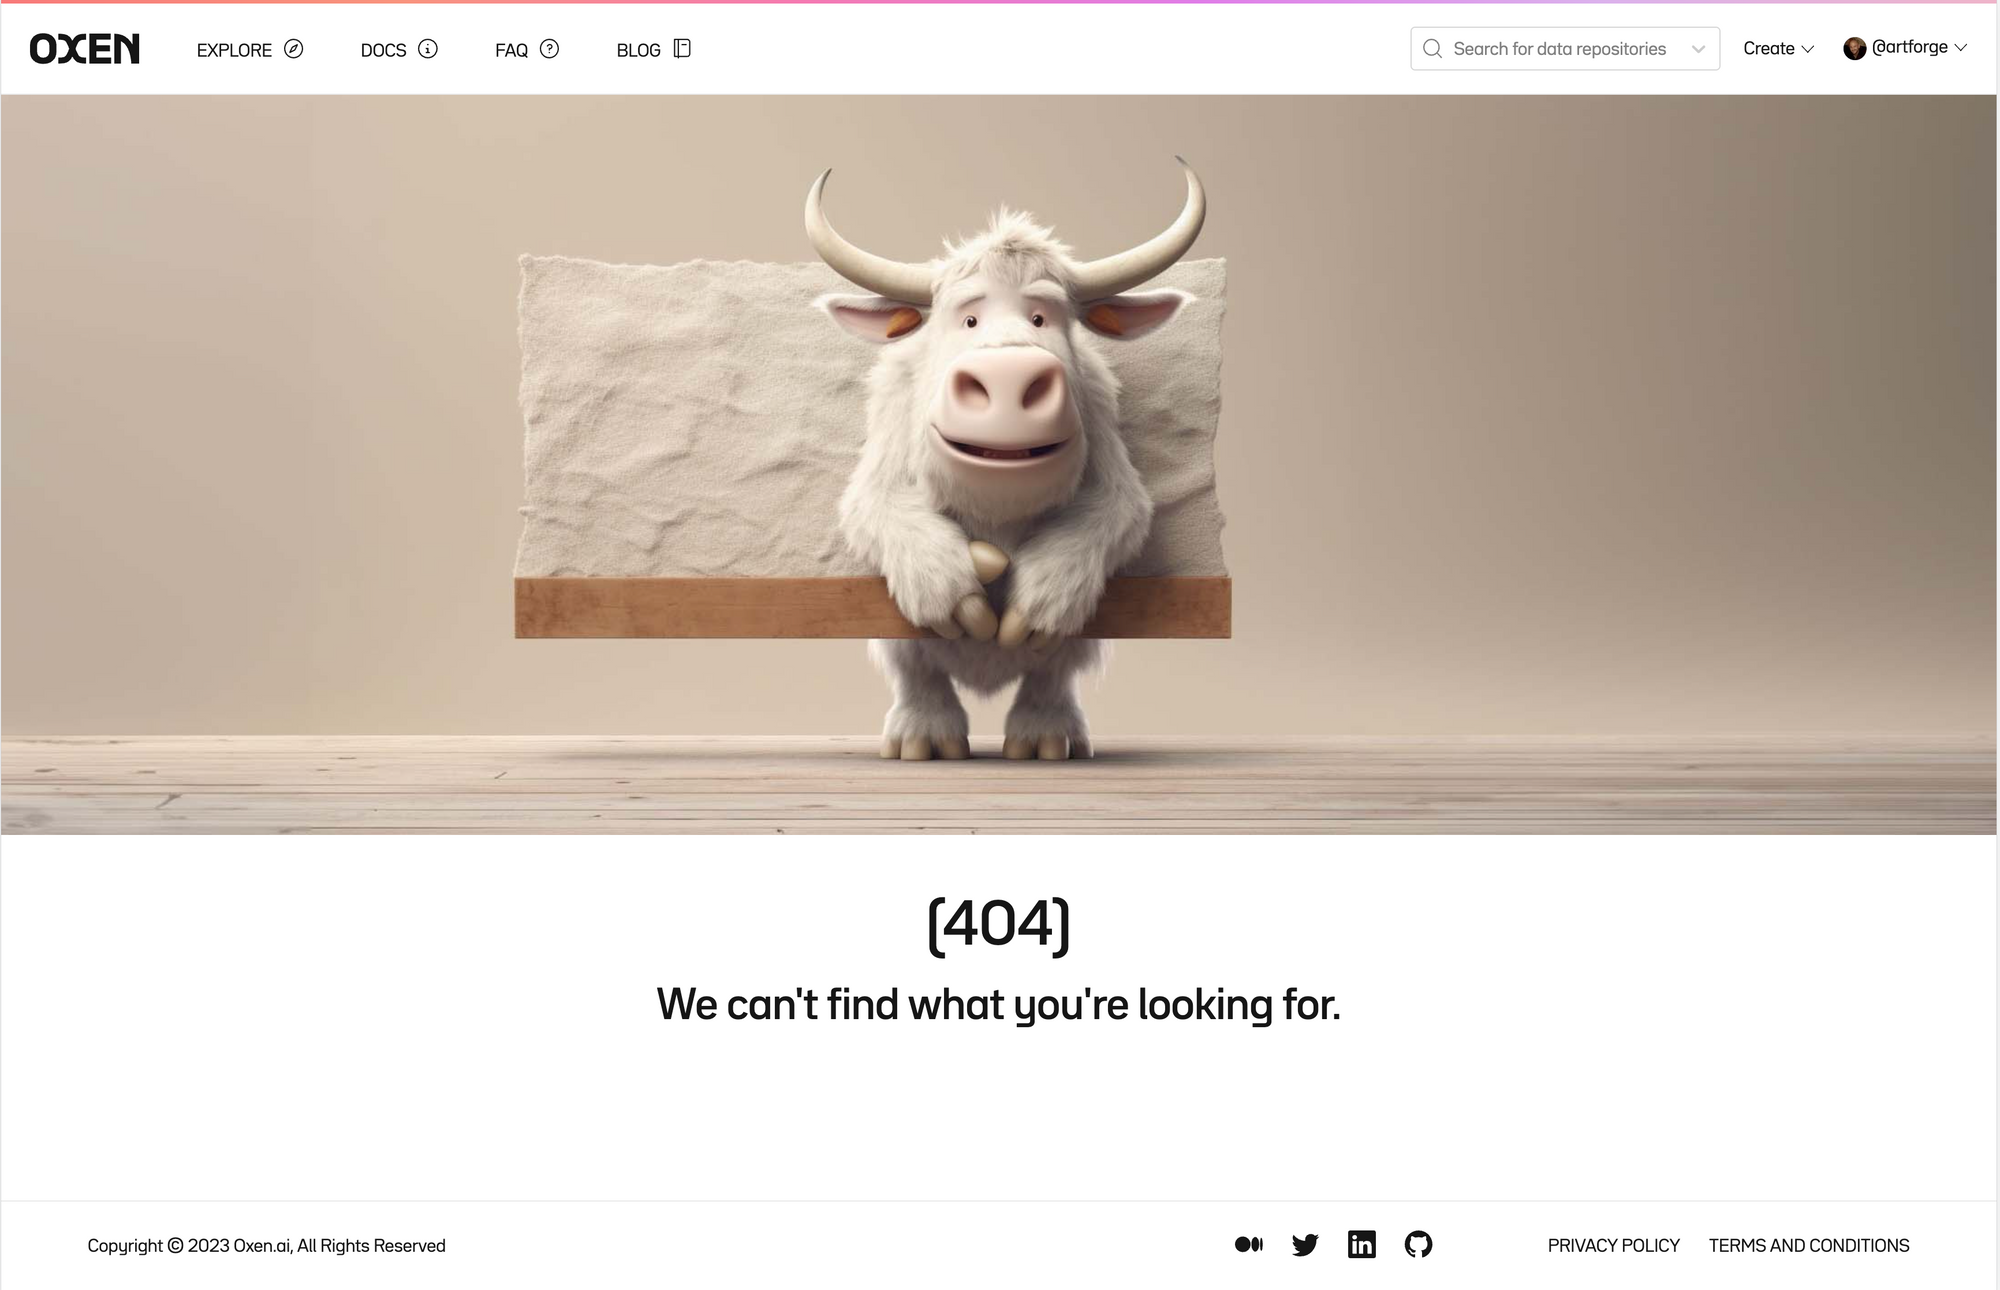 The 404 Not Found page for oxen.ai, showing a cute cartoon ox